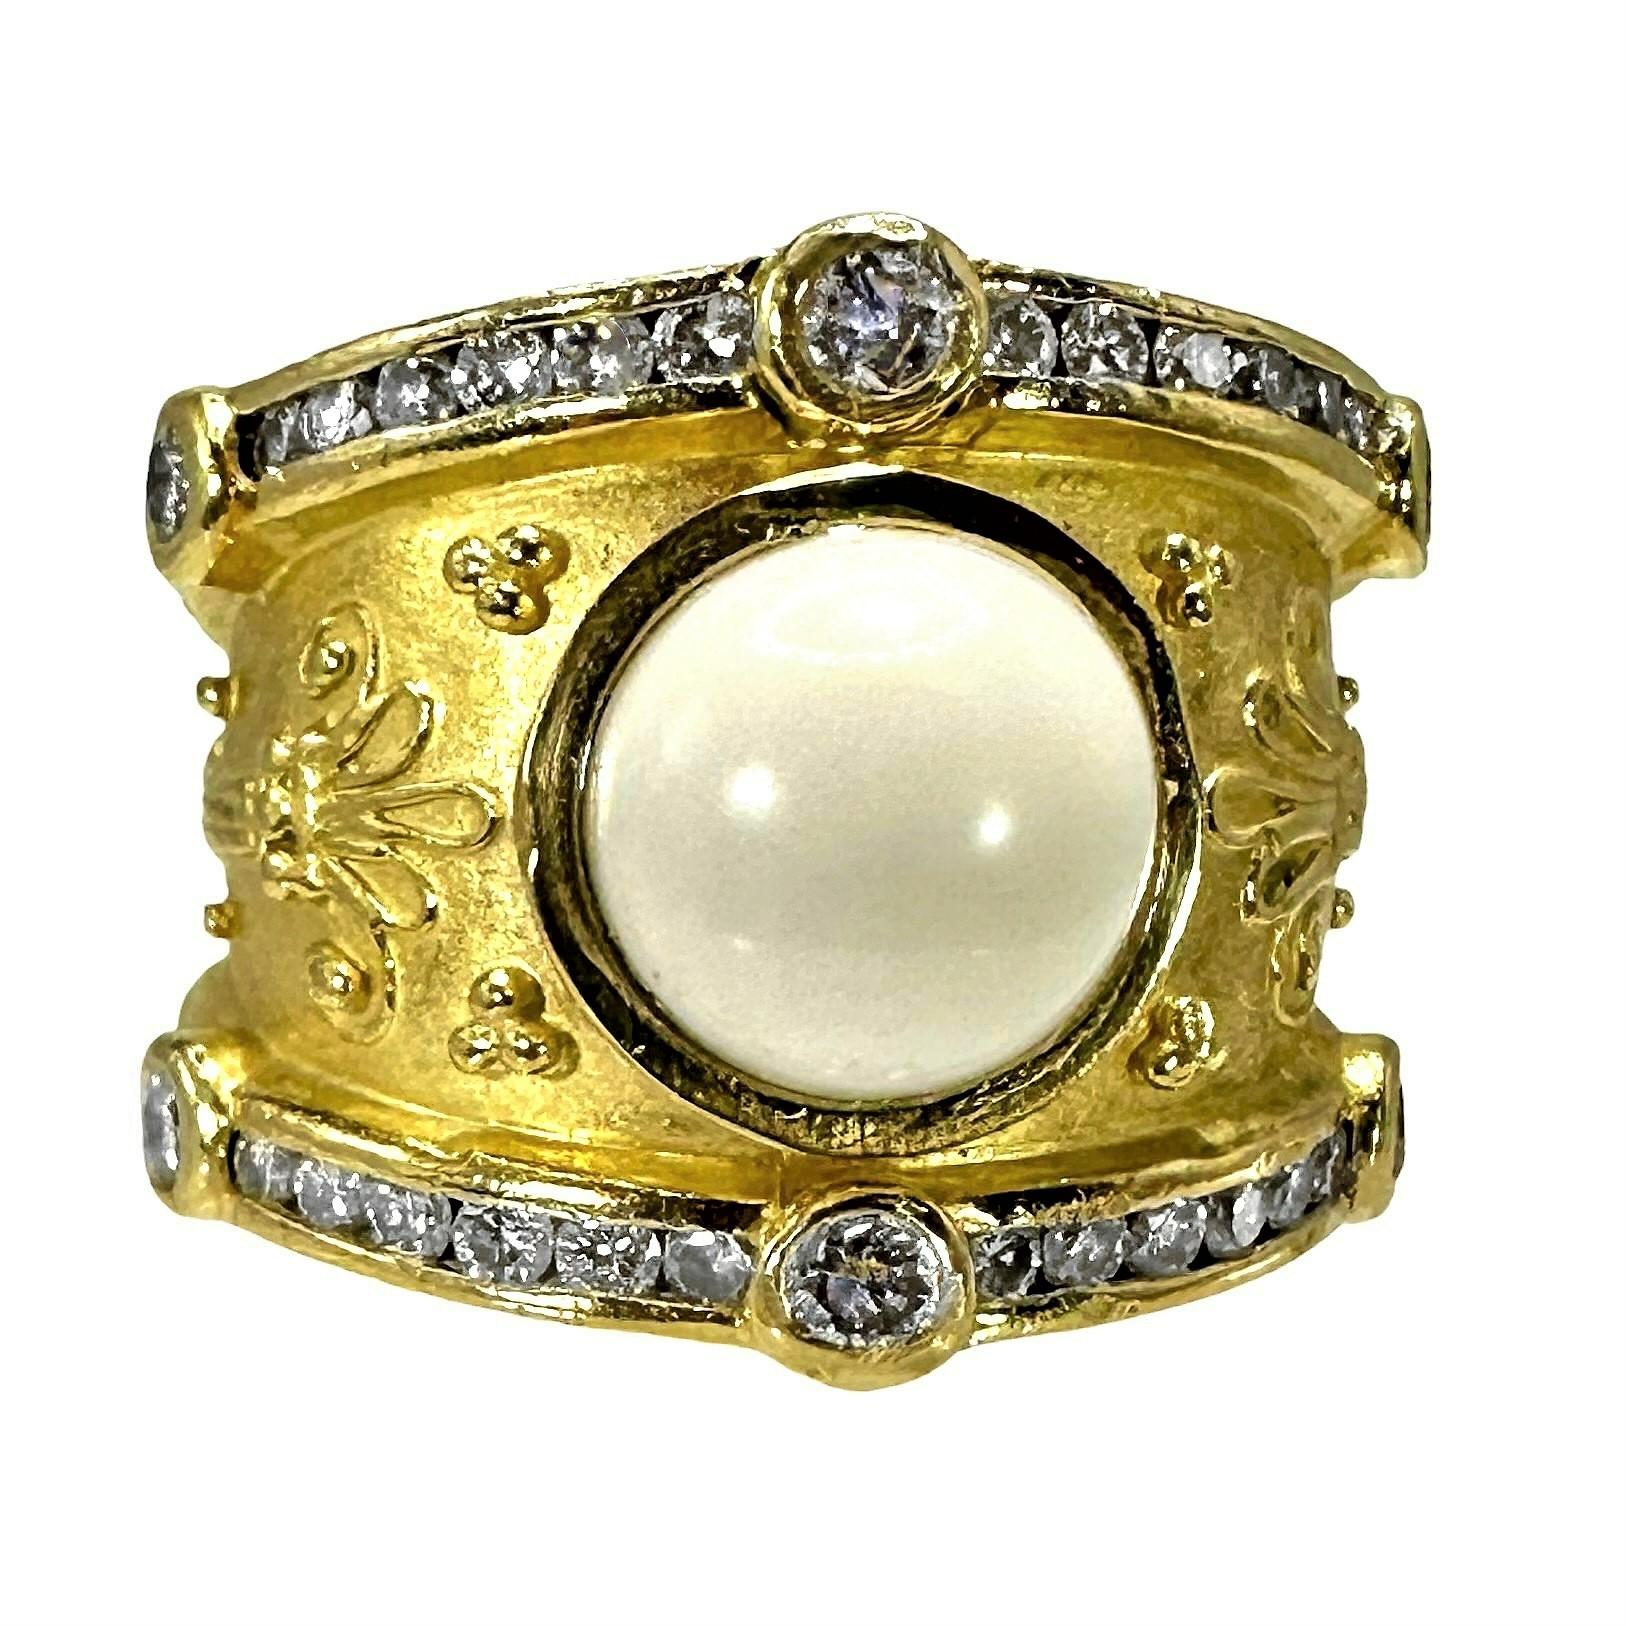 This handsome Seiden Gang Classic Revival ring is fashioned from 18K yellow gold, with an 8mm diameter white onyx cabochon at it's center. Both edges of the ring are set with a single line of round brilliant cut diamonds that extend to the ends of